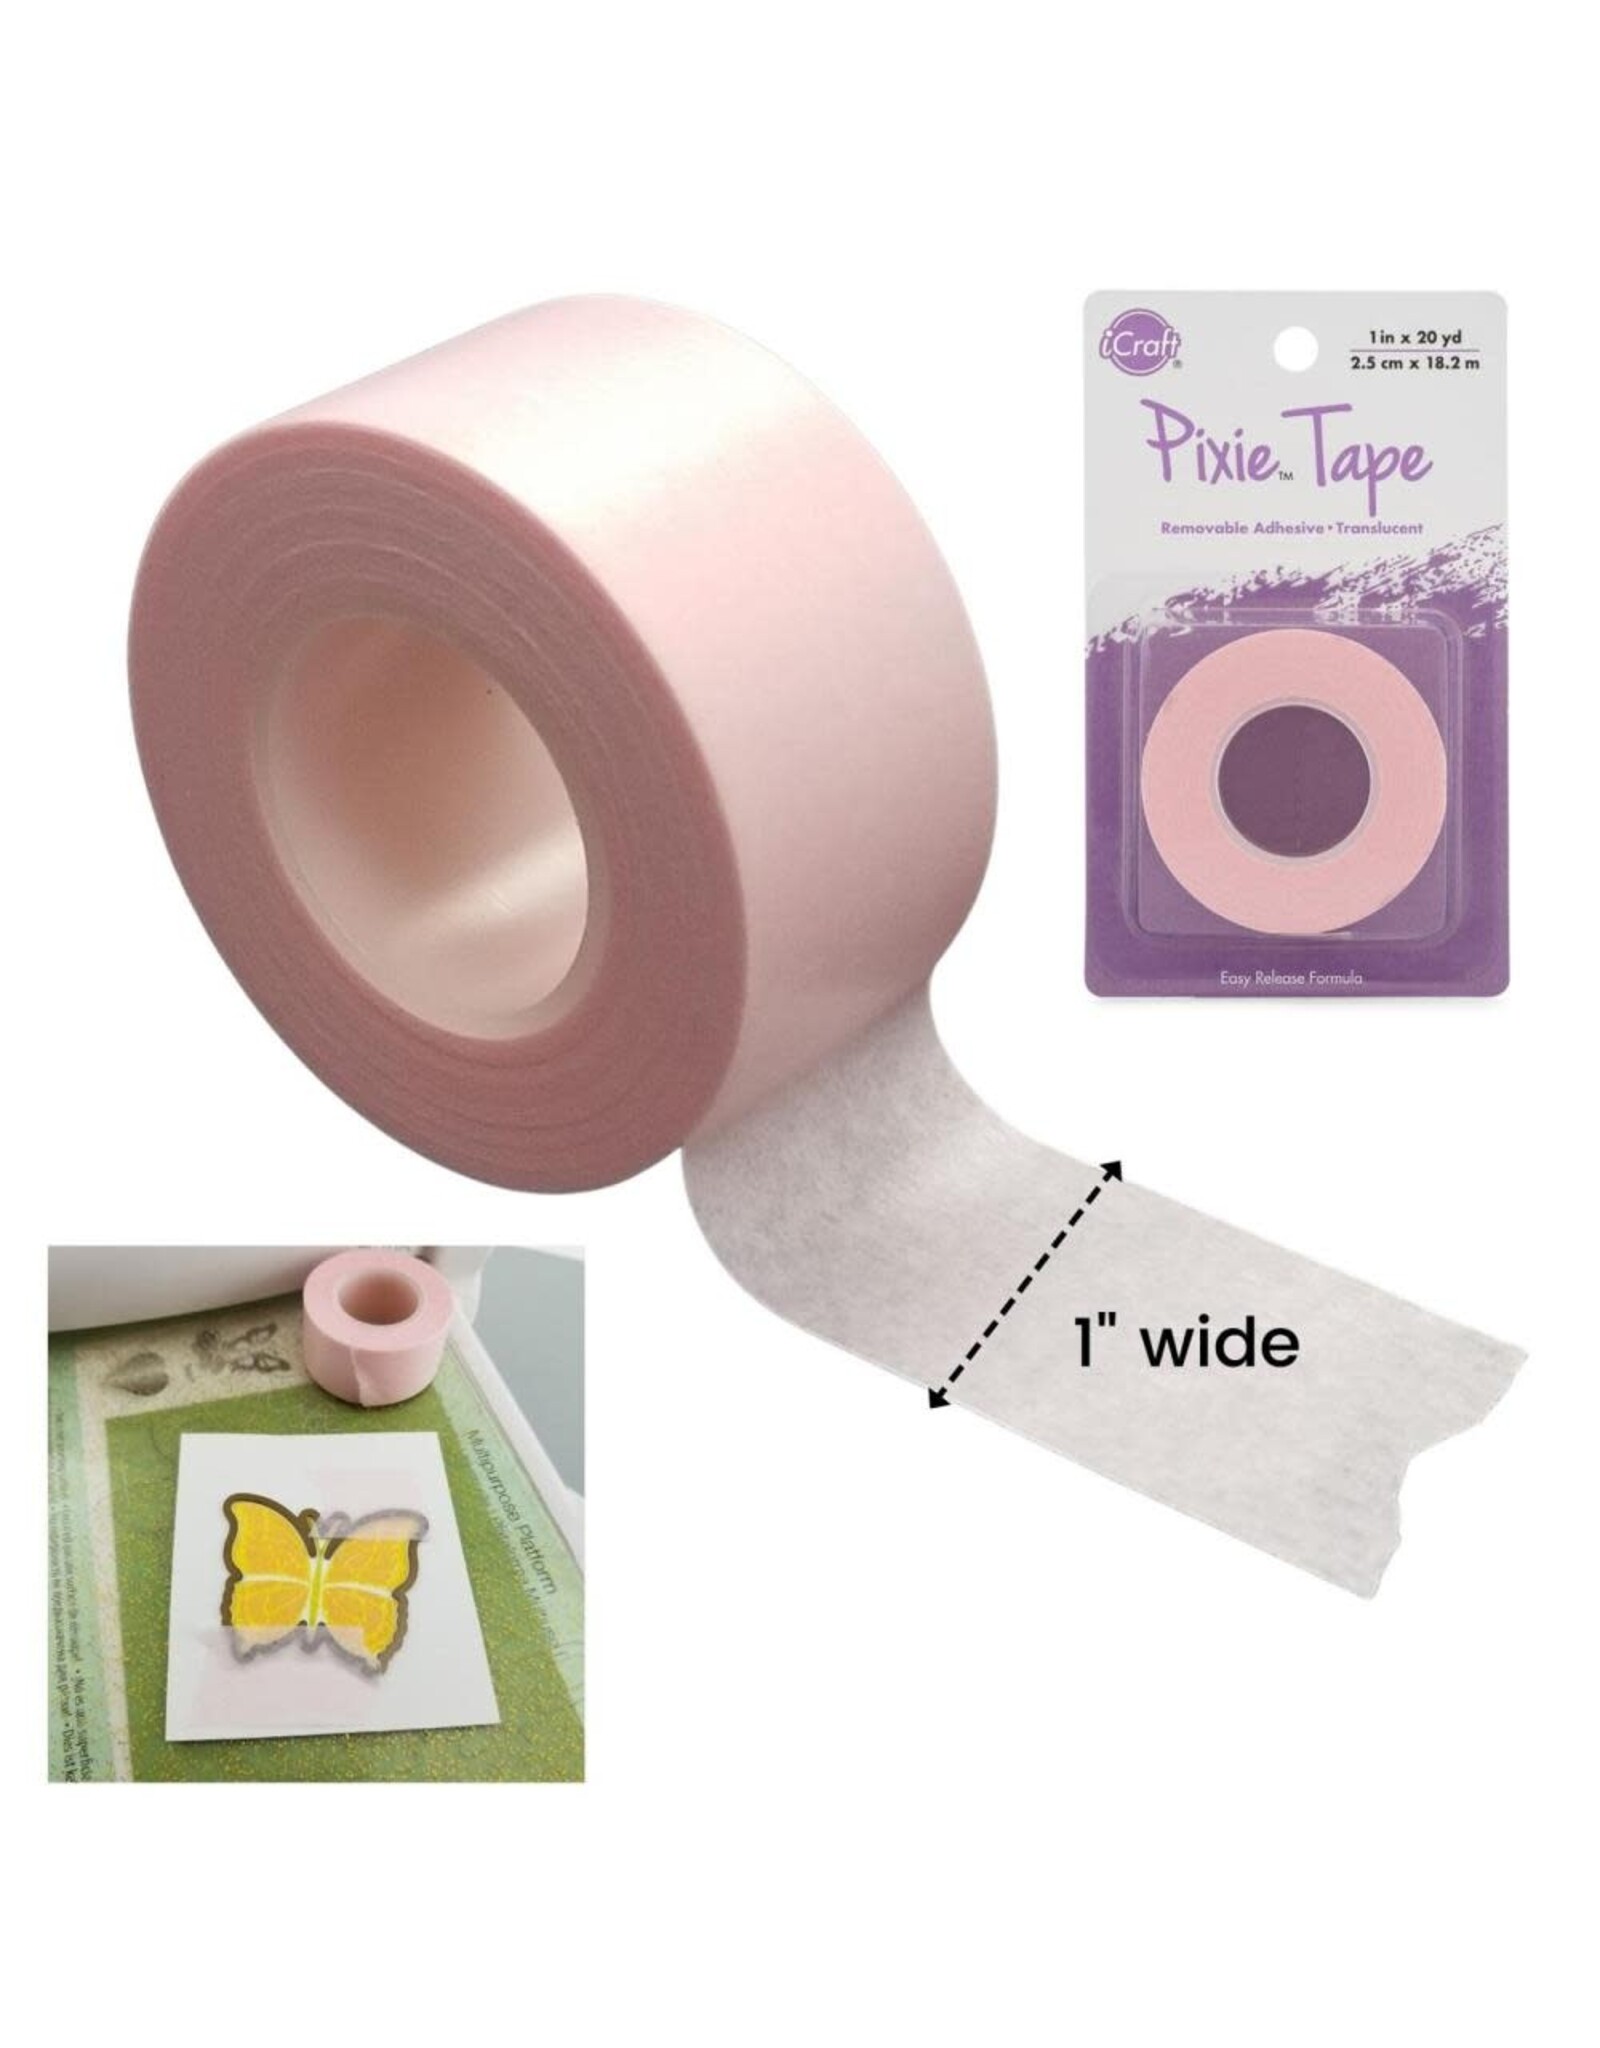 iCraft PIXIE TAPE REMOVABLE - 1"X20YD